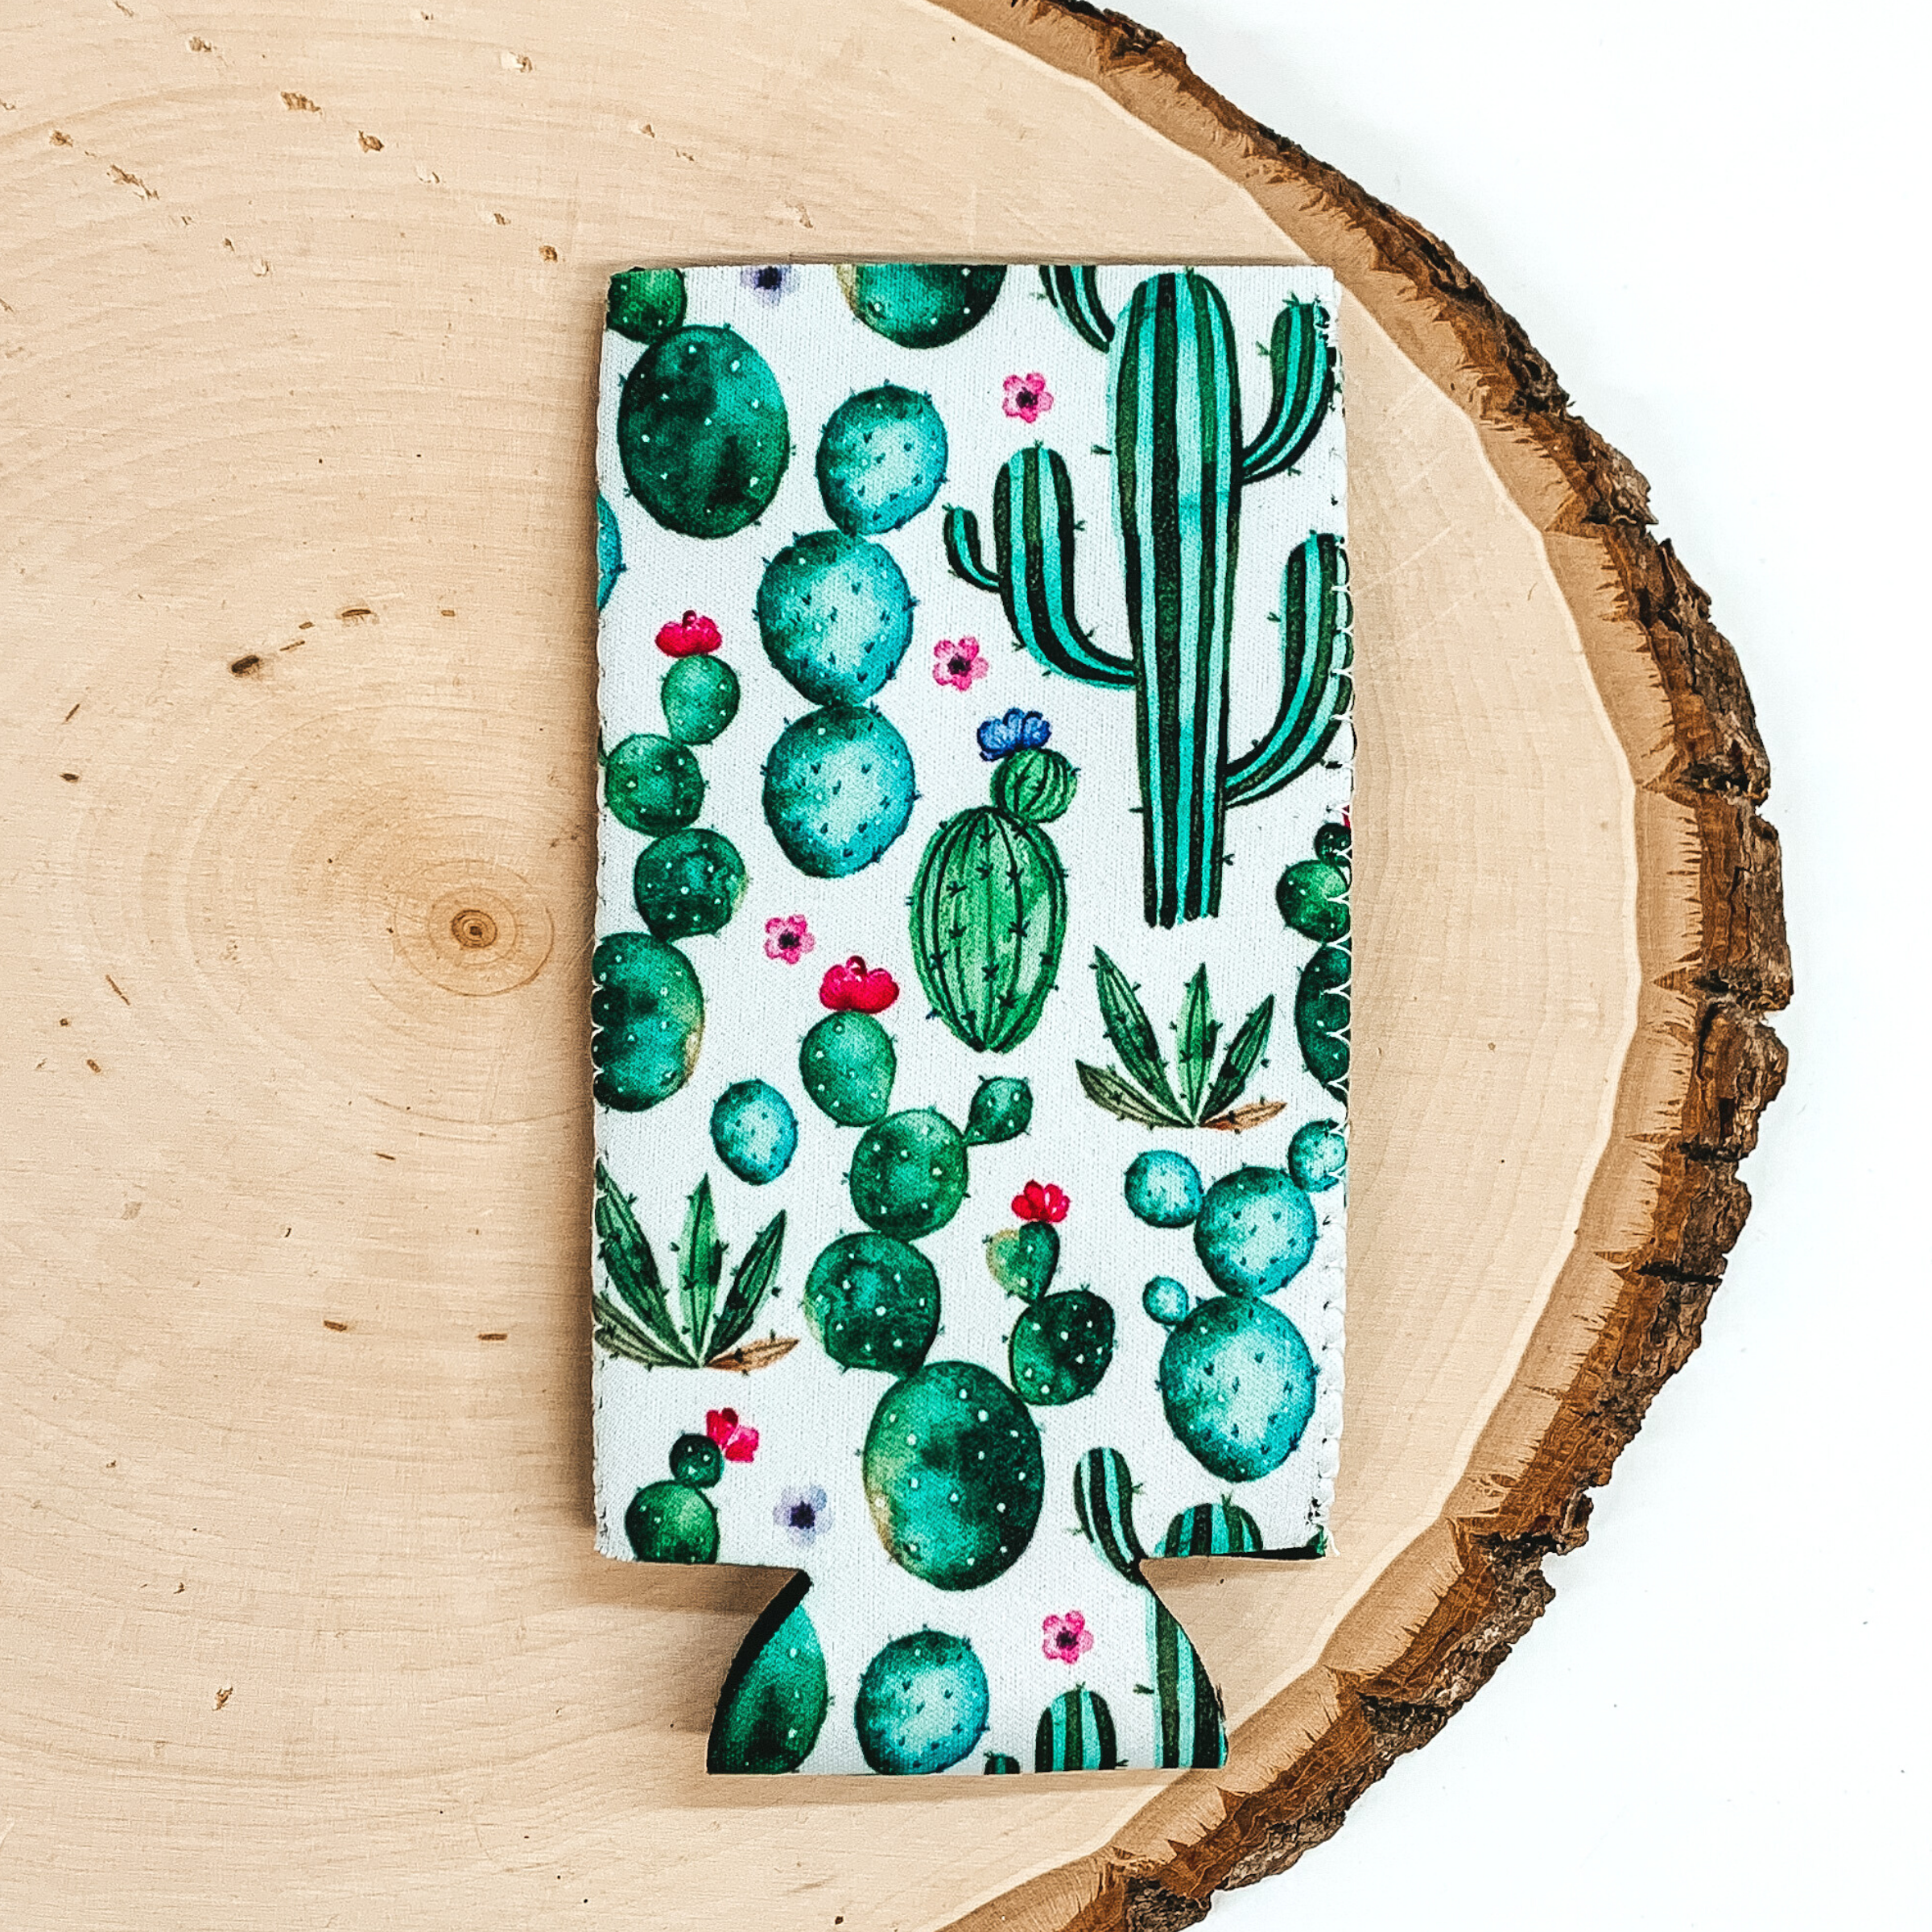 White slim can koozie with different shaped cacti in different shades of green and a few pink flowers. This koozie is pictured laying on a piece of wood on a white background.